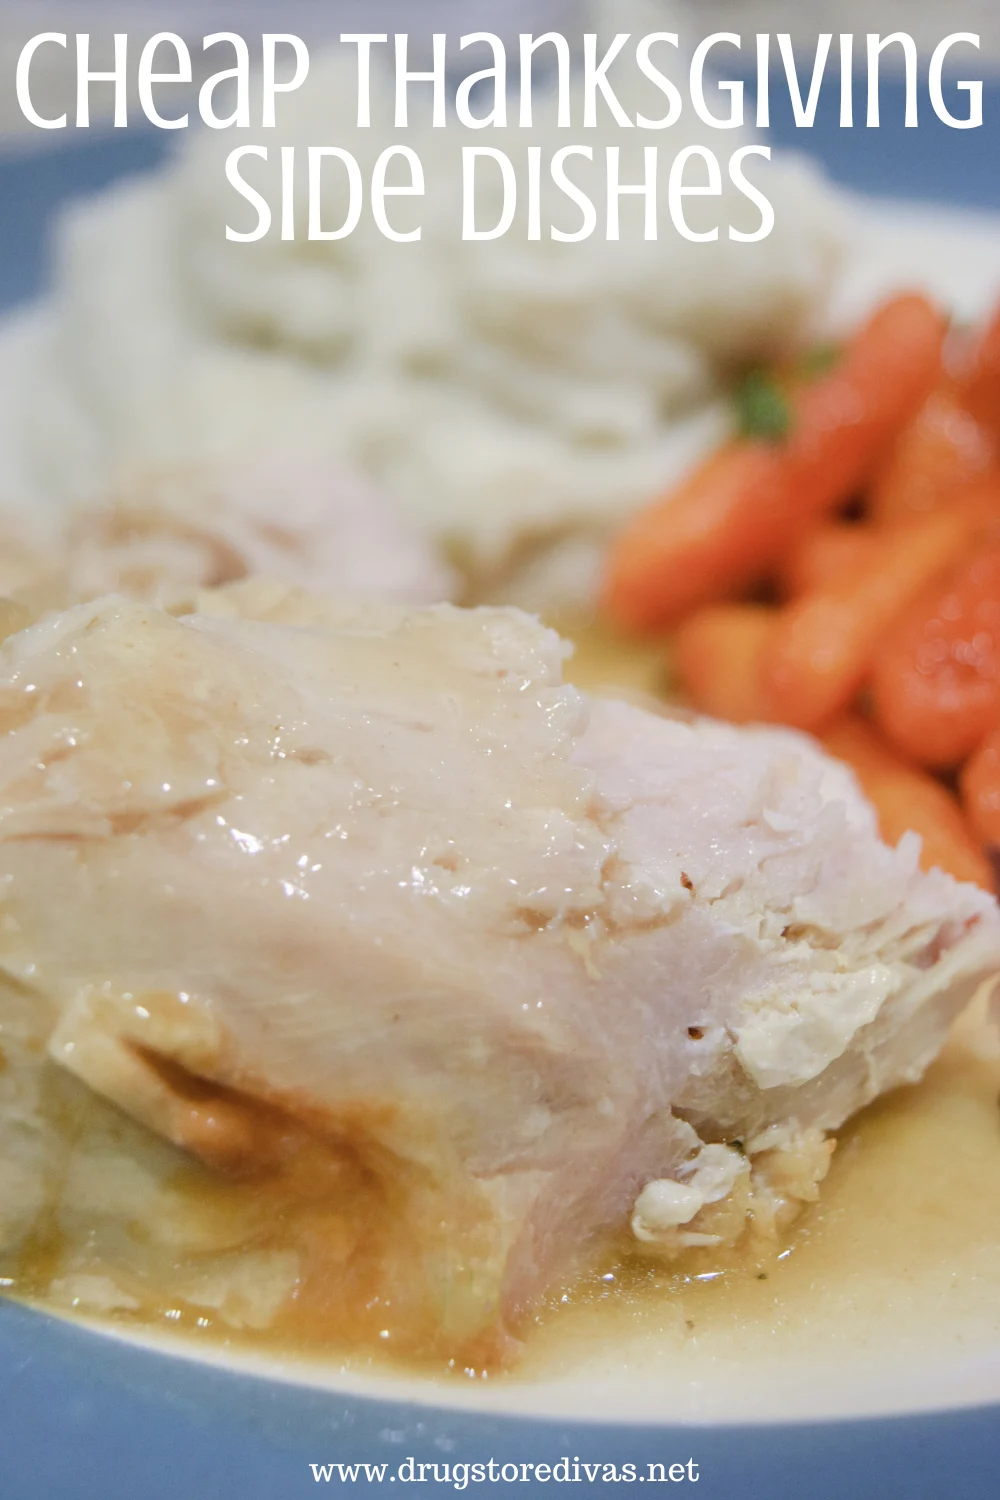 Roast turkey, carrots, and mashed potatoes on a blue and white plate with the words 